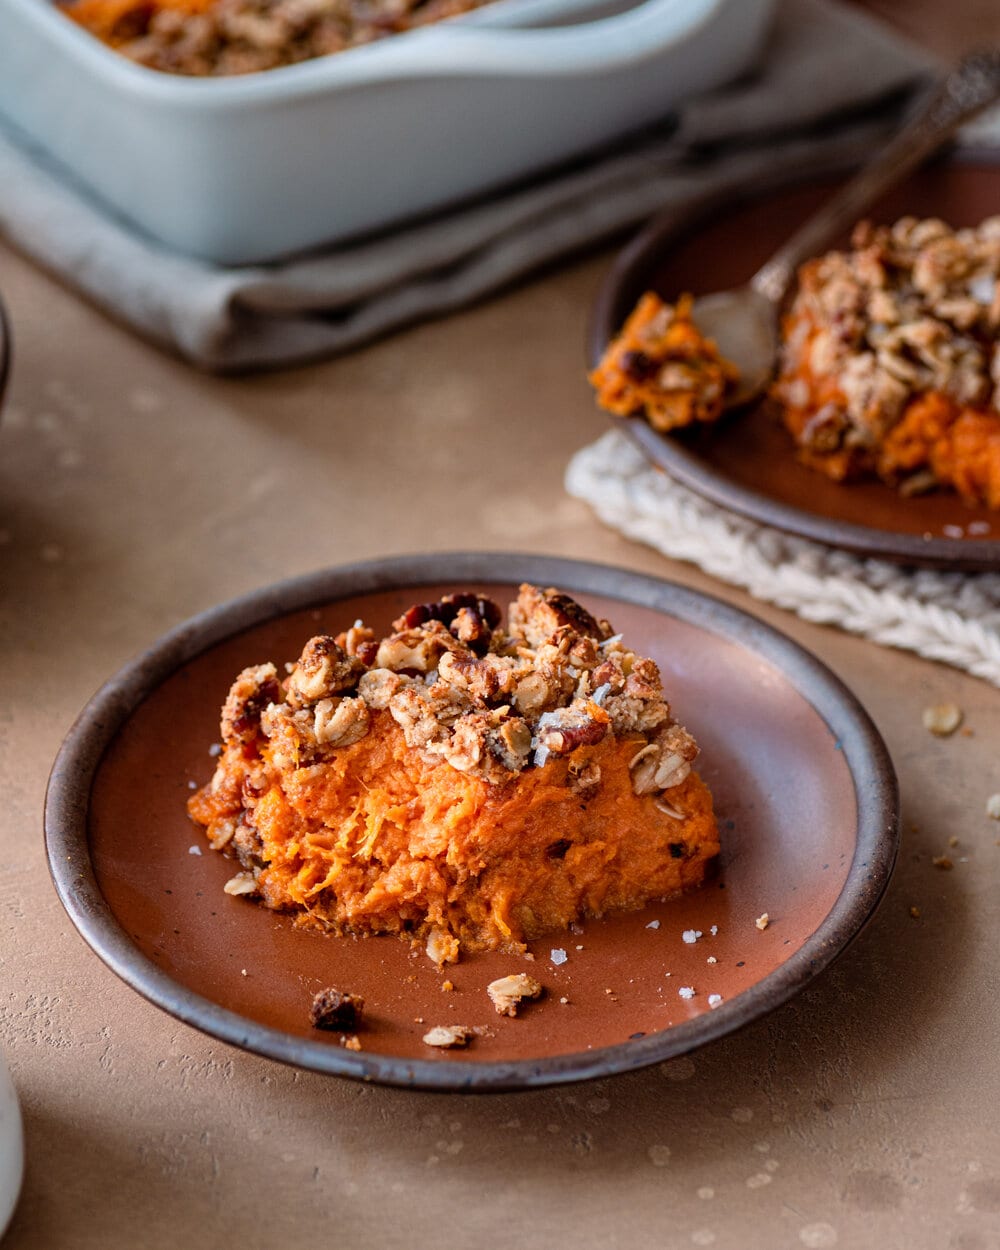 Piece of sweet potato casserole cut out and placed on a brown dish.